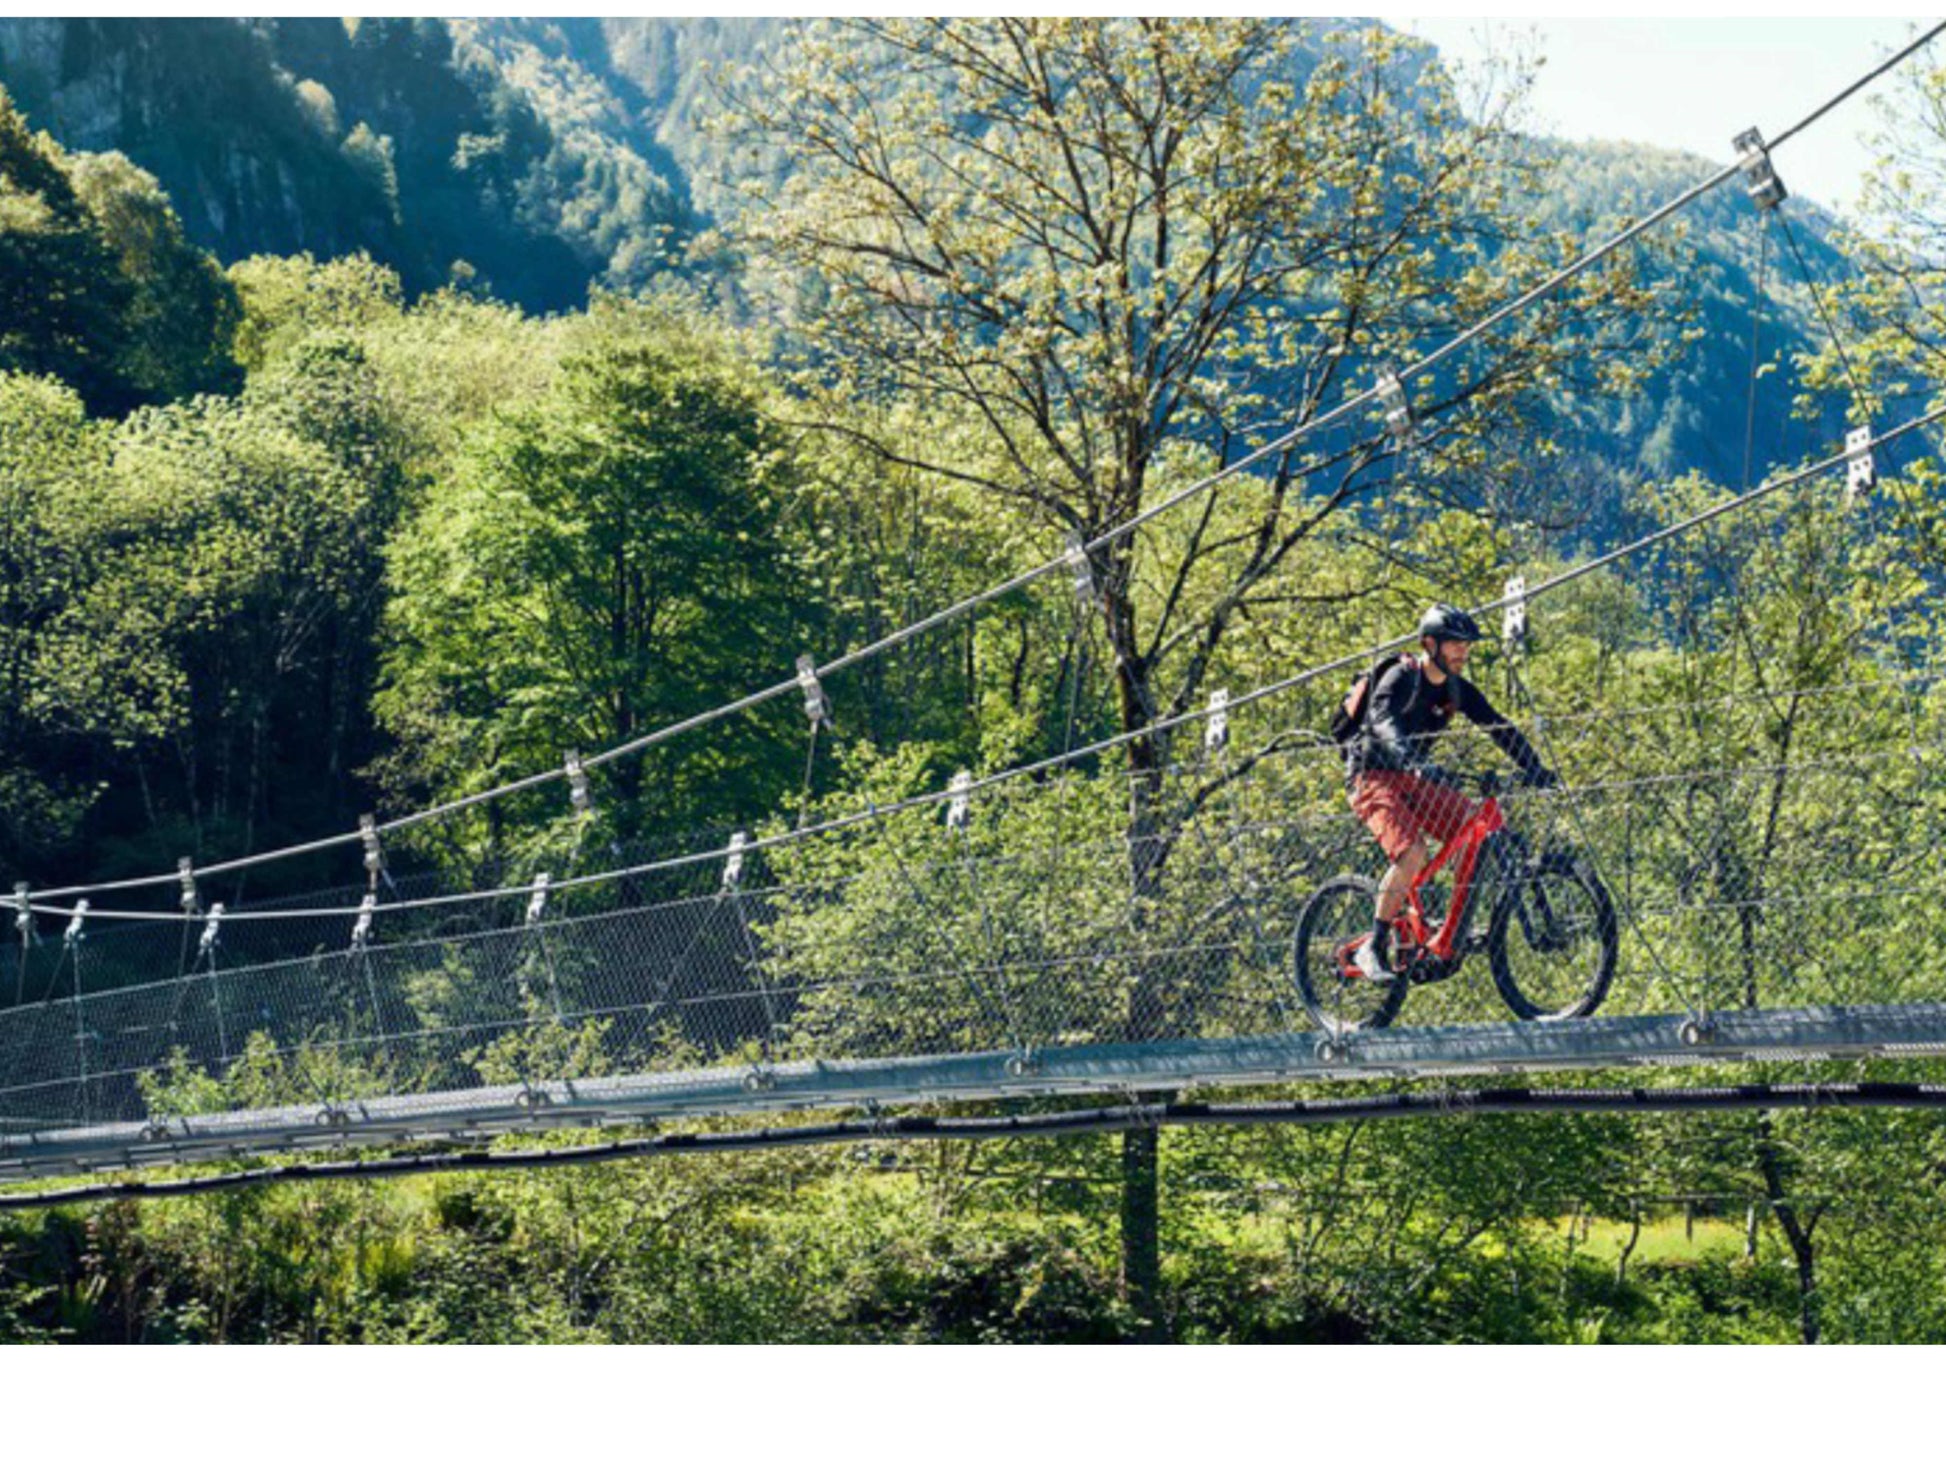 Riese and Muller Delite Mountain Rohloff eMTB full suspension man riding across old wooden bridge